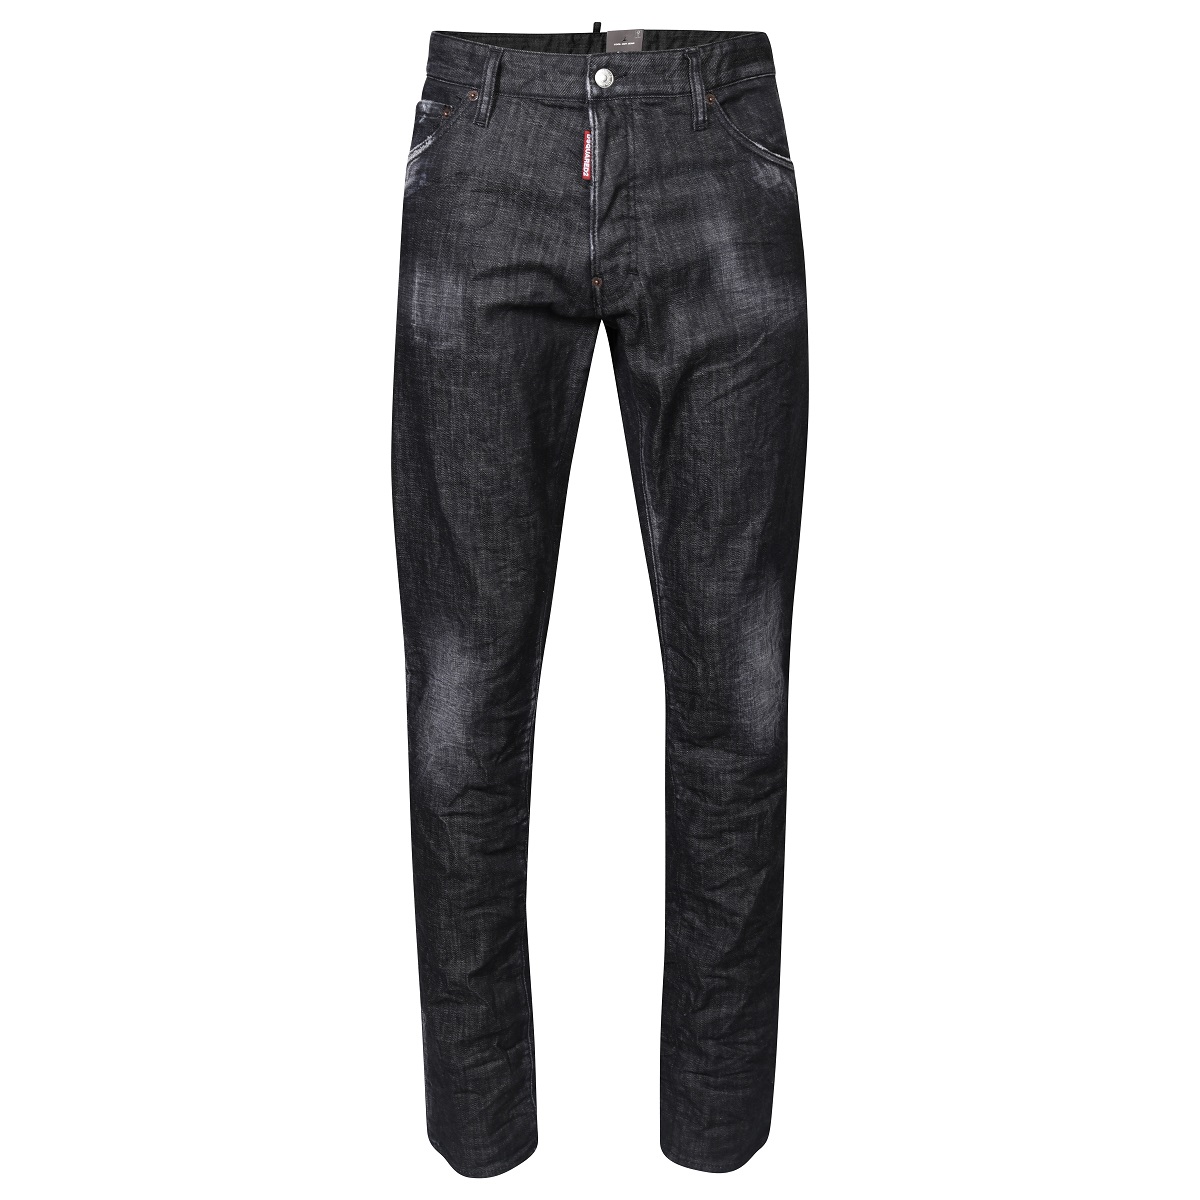 DSQUARED2 Jeans Cool Guy in Black